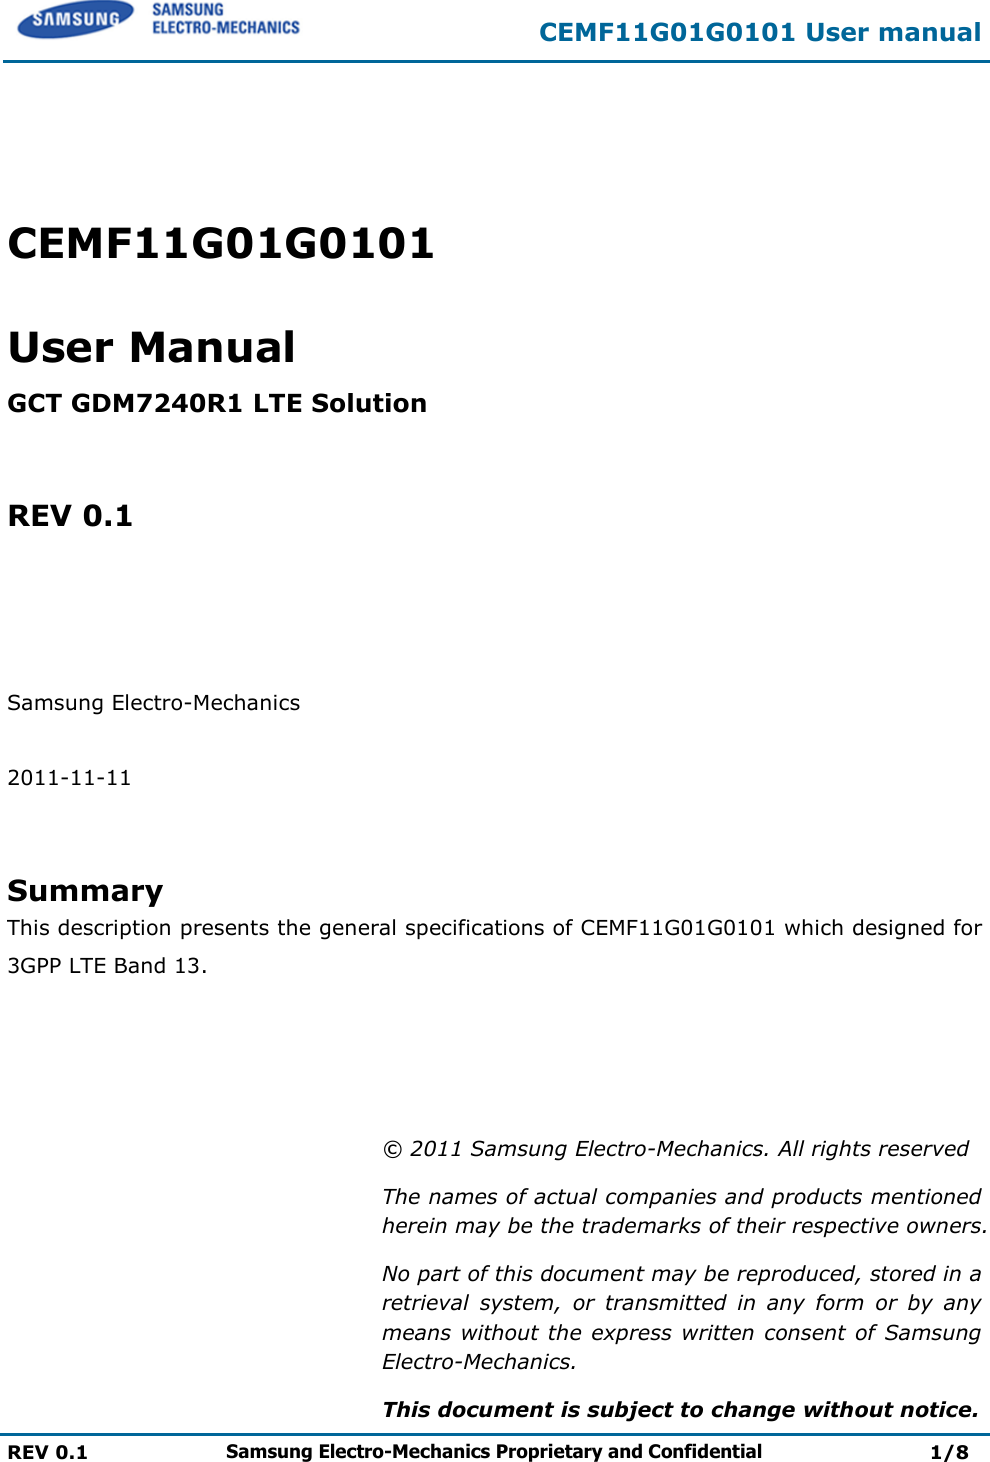  CEMF11G01G0101 User manual  REV 0.1 Samsung Electro-Mechanics Proprietary and Confidential 1/8    CEMF11G01G0101  User Manual  GCT GDM7240R1 LTE Solution   REV 0.1     Samsung Electro-Mechanics  2011-11-11   Summary This description presents the general specifications of CEMF11G01G0101 which designed for 3GPP LTE Band 13.     © 2011 Samsung Electro-Mechanics. All rights reserved The names of actual companies and products mentioned herein may be the trademarks of their respective owners. No part of this document may be reproduced, stored in a retrieval  system,  or  transmitted  in  any  form  or  by  any means without the  express written consent of  Samsung Electro-Mechanics. This document is subject to change without notice. 